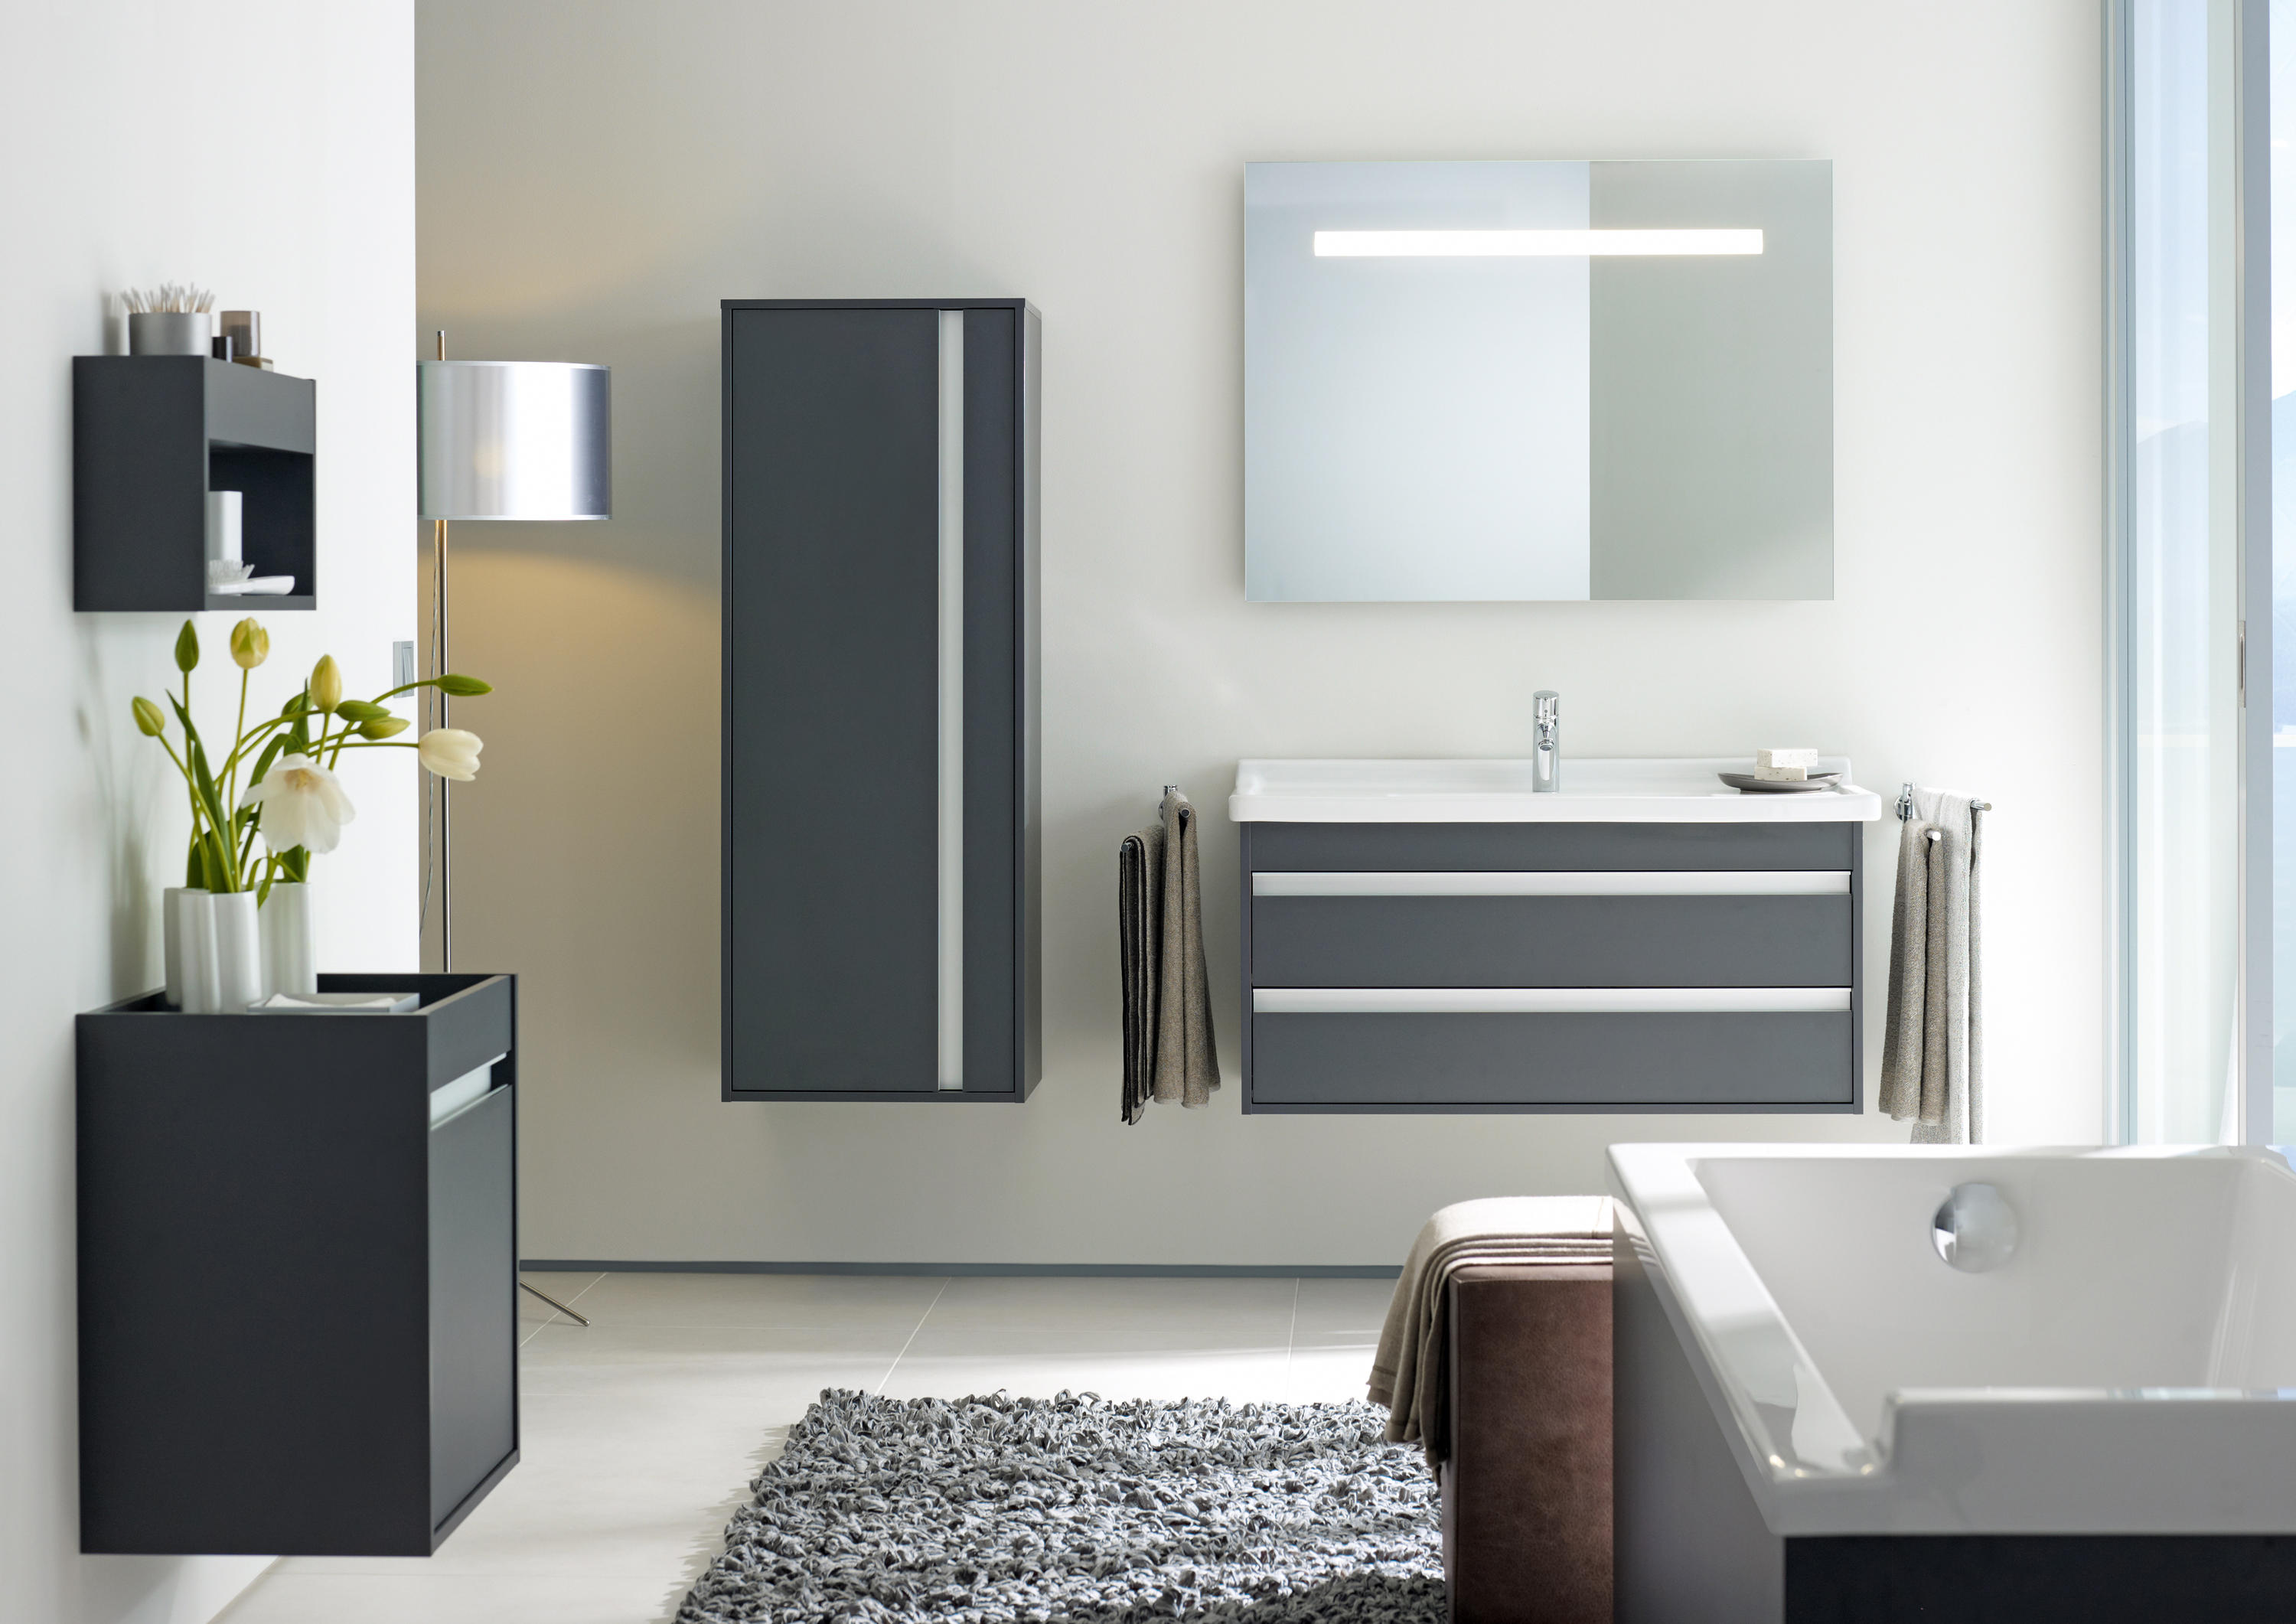 Ketho - Vanity units with integrated console | Architonic